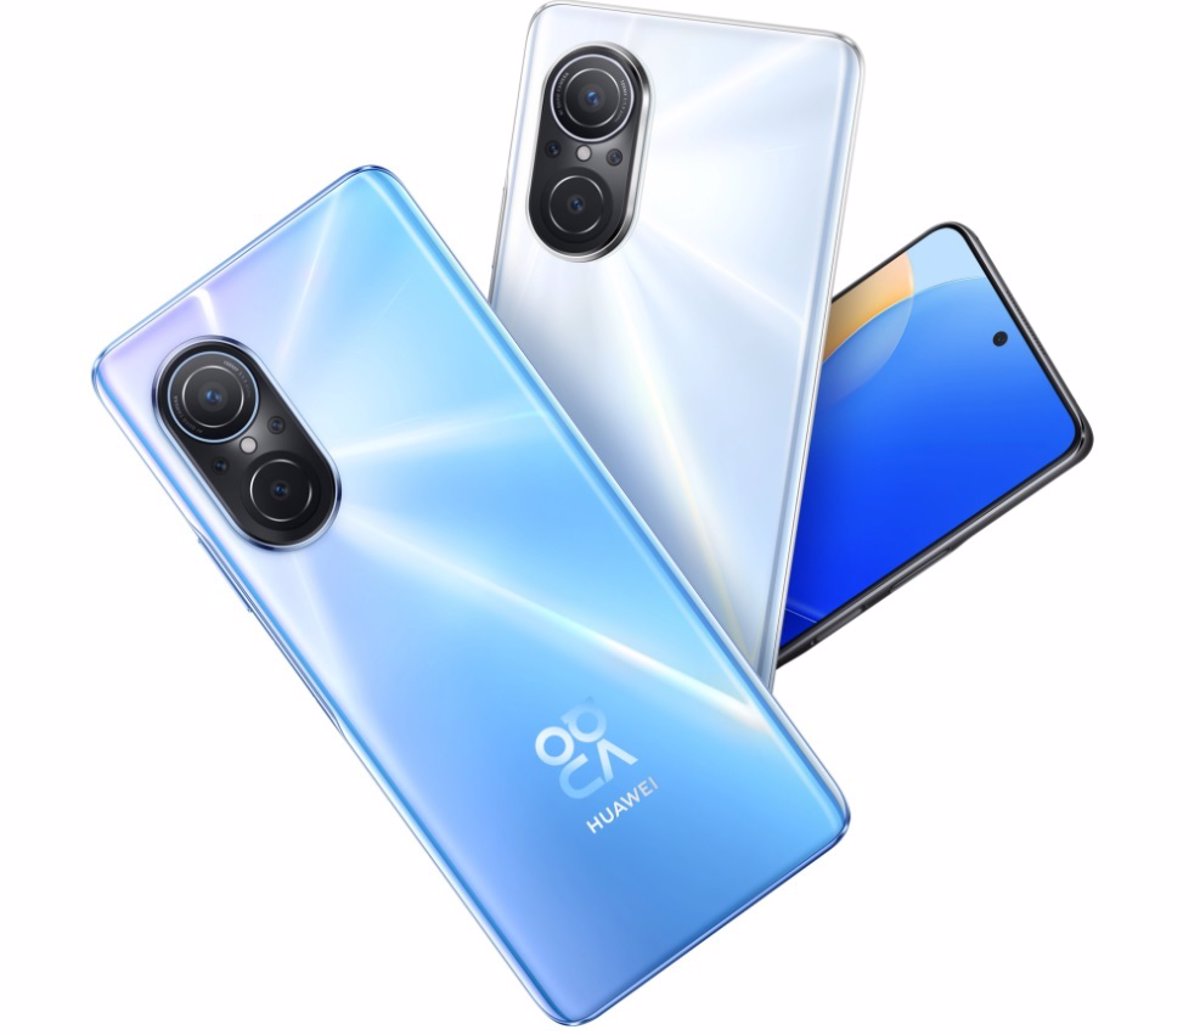 Huawei Nova 9 SE, with 108MP camera and 90Hz screen, lands in Spain for 349 euros